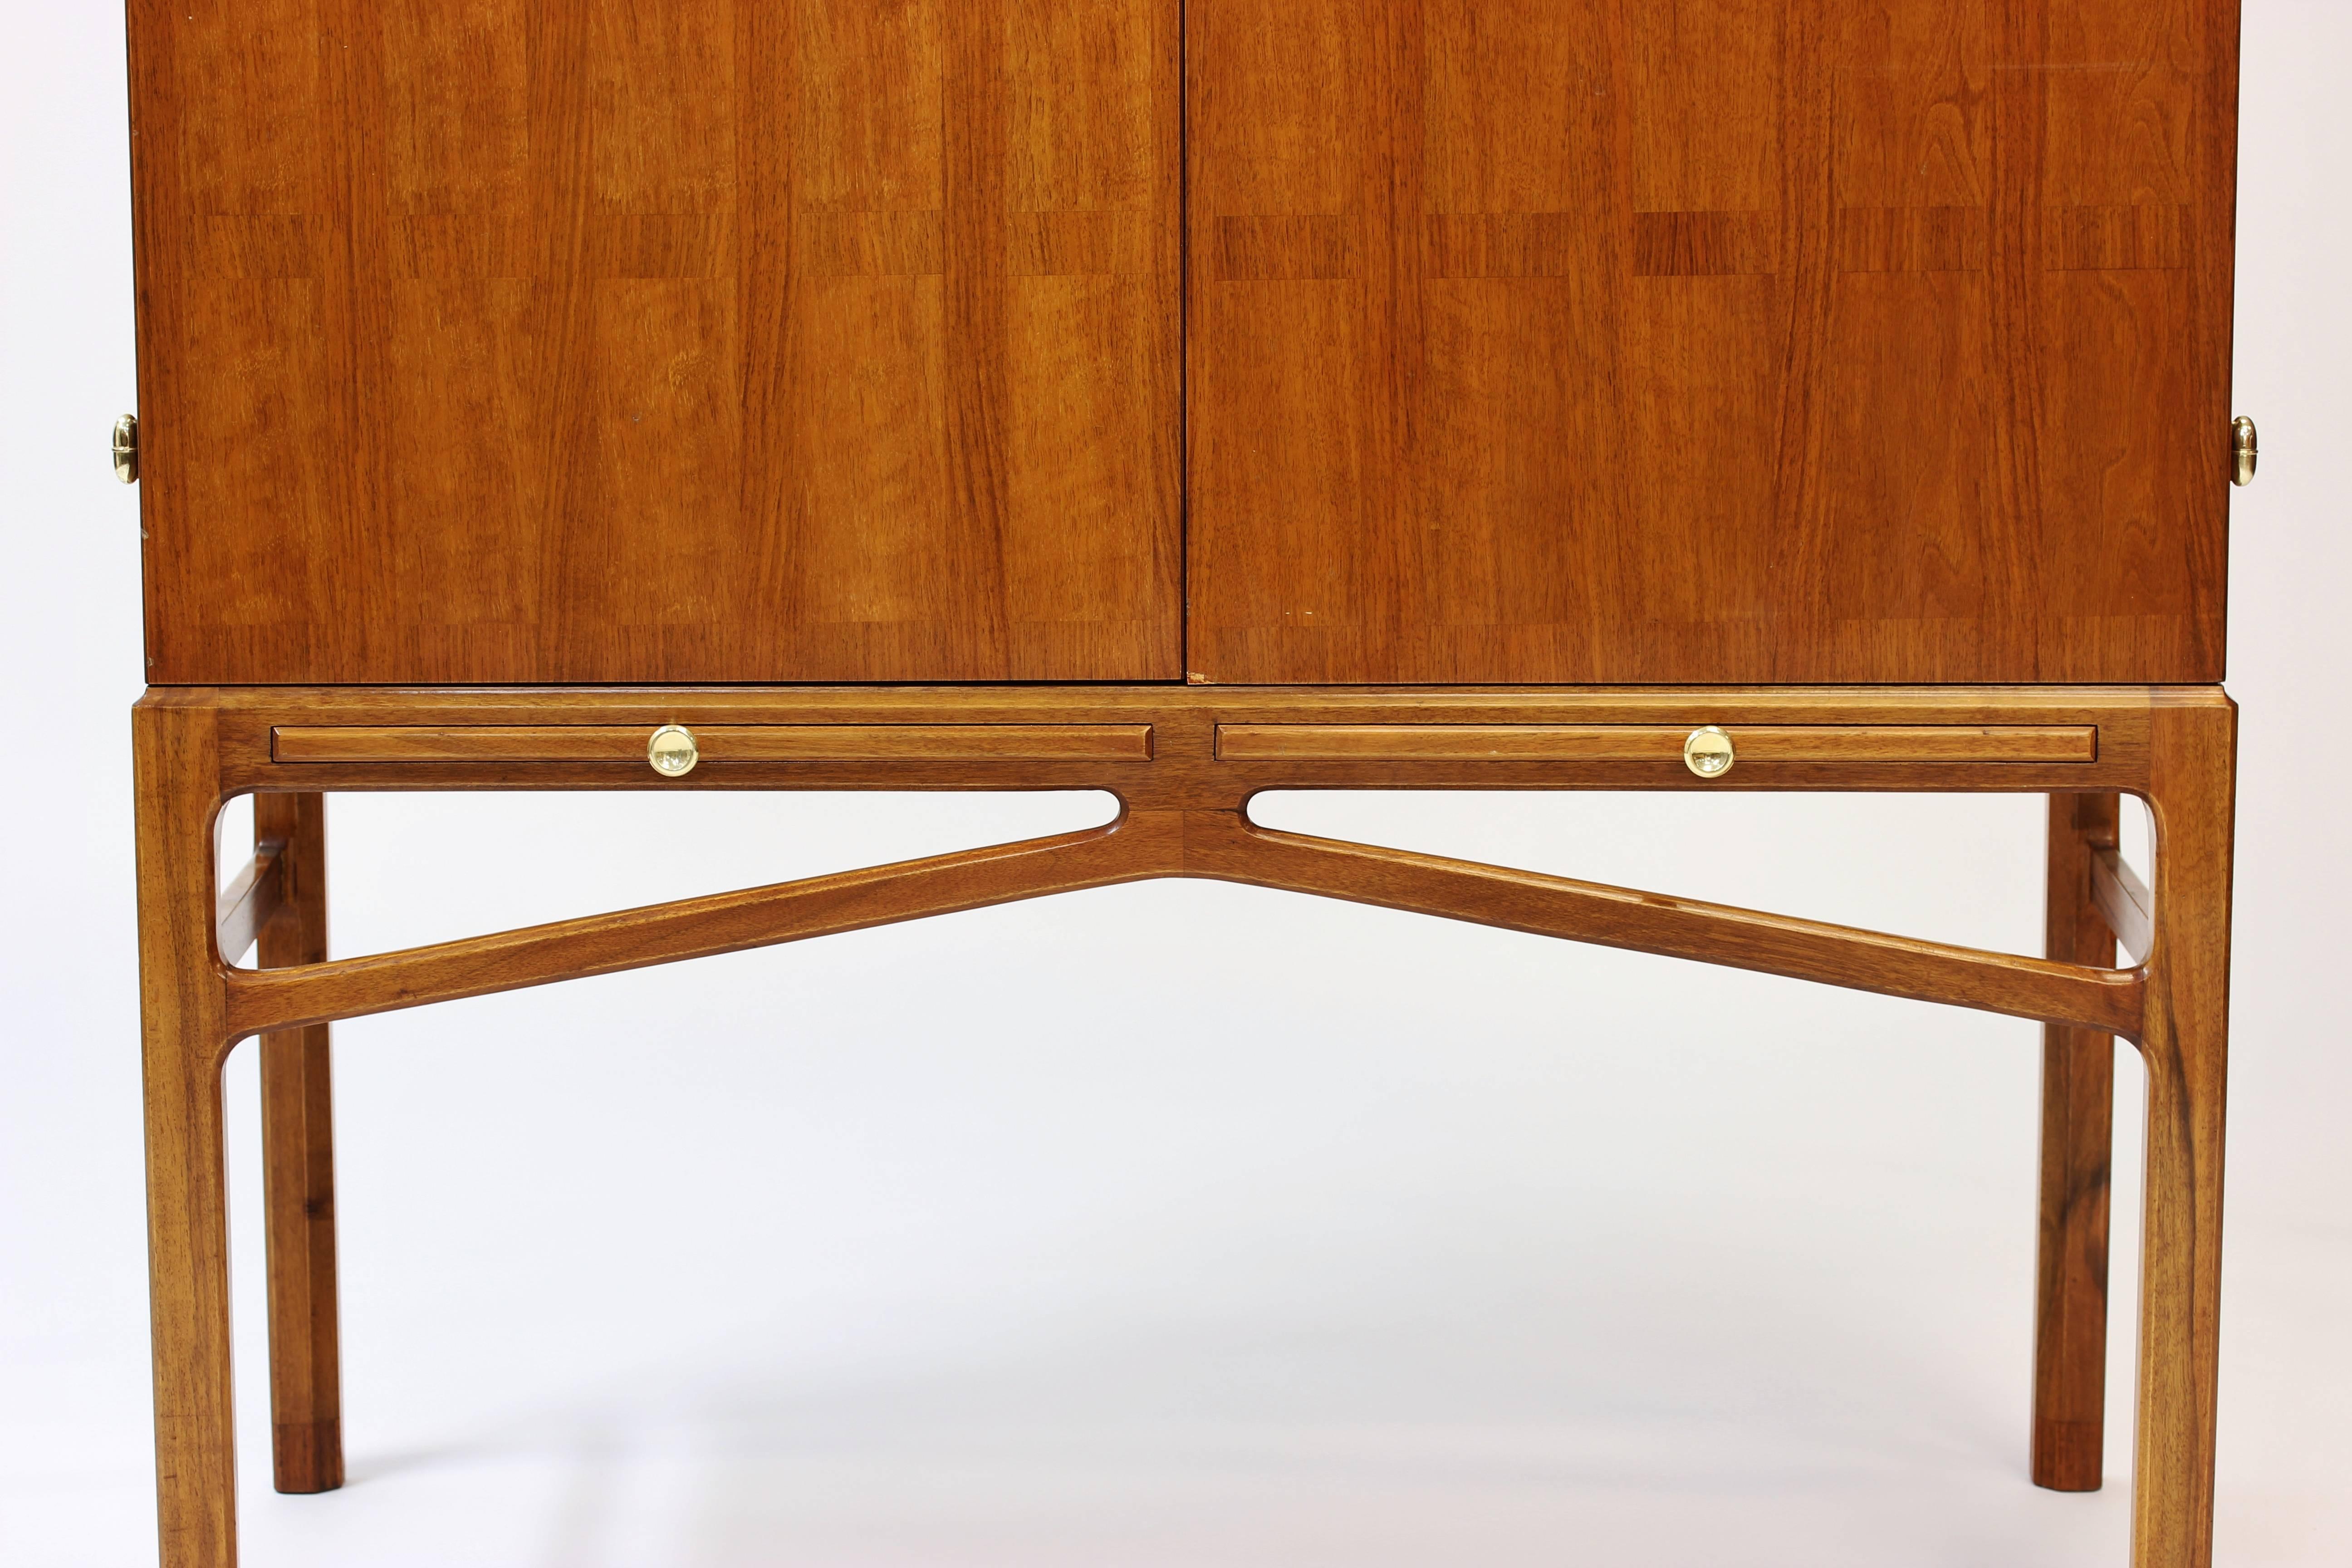 Cabinet by Carl-Axel Acking. Made by NK furniture and sold trough Ferdinand Lundqvist in Gothenburg. In mahogany with brass details. Exceptional craftsmanship and design.